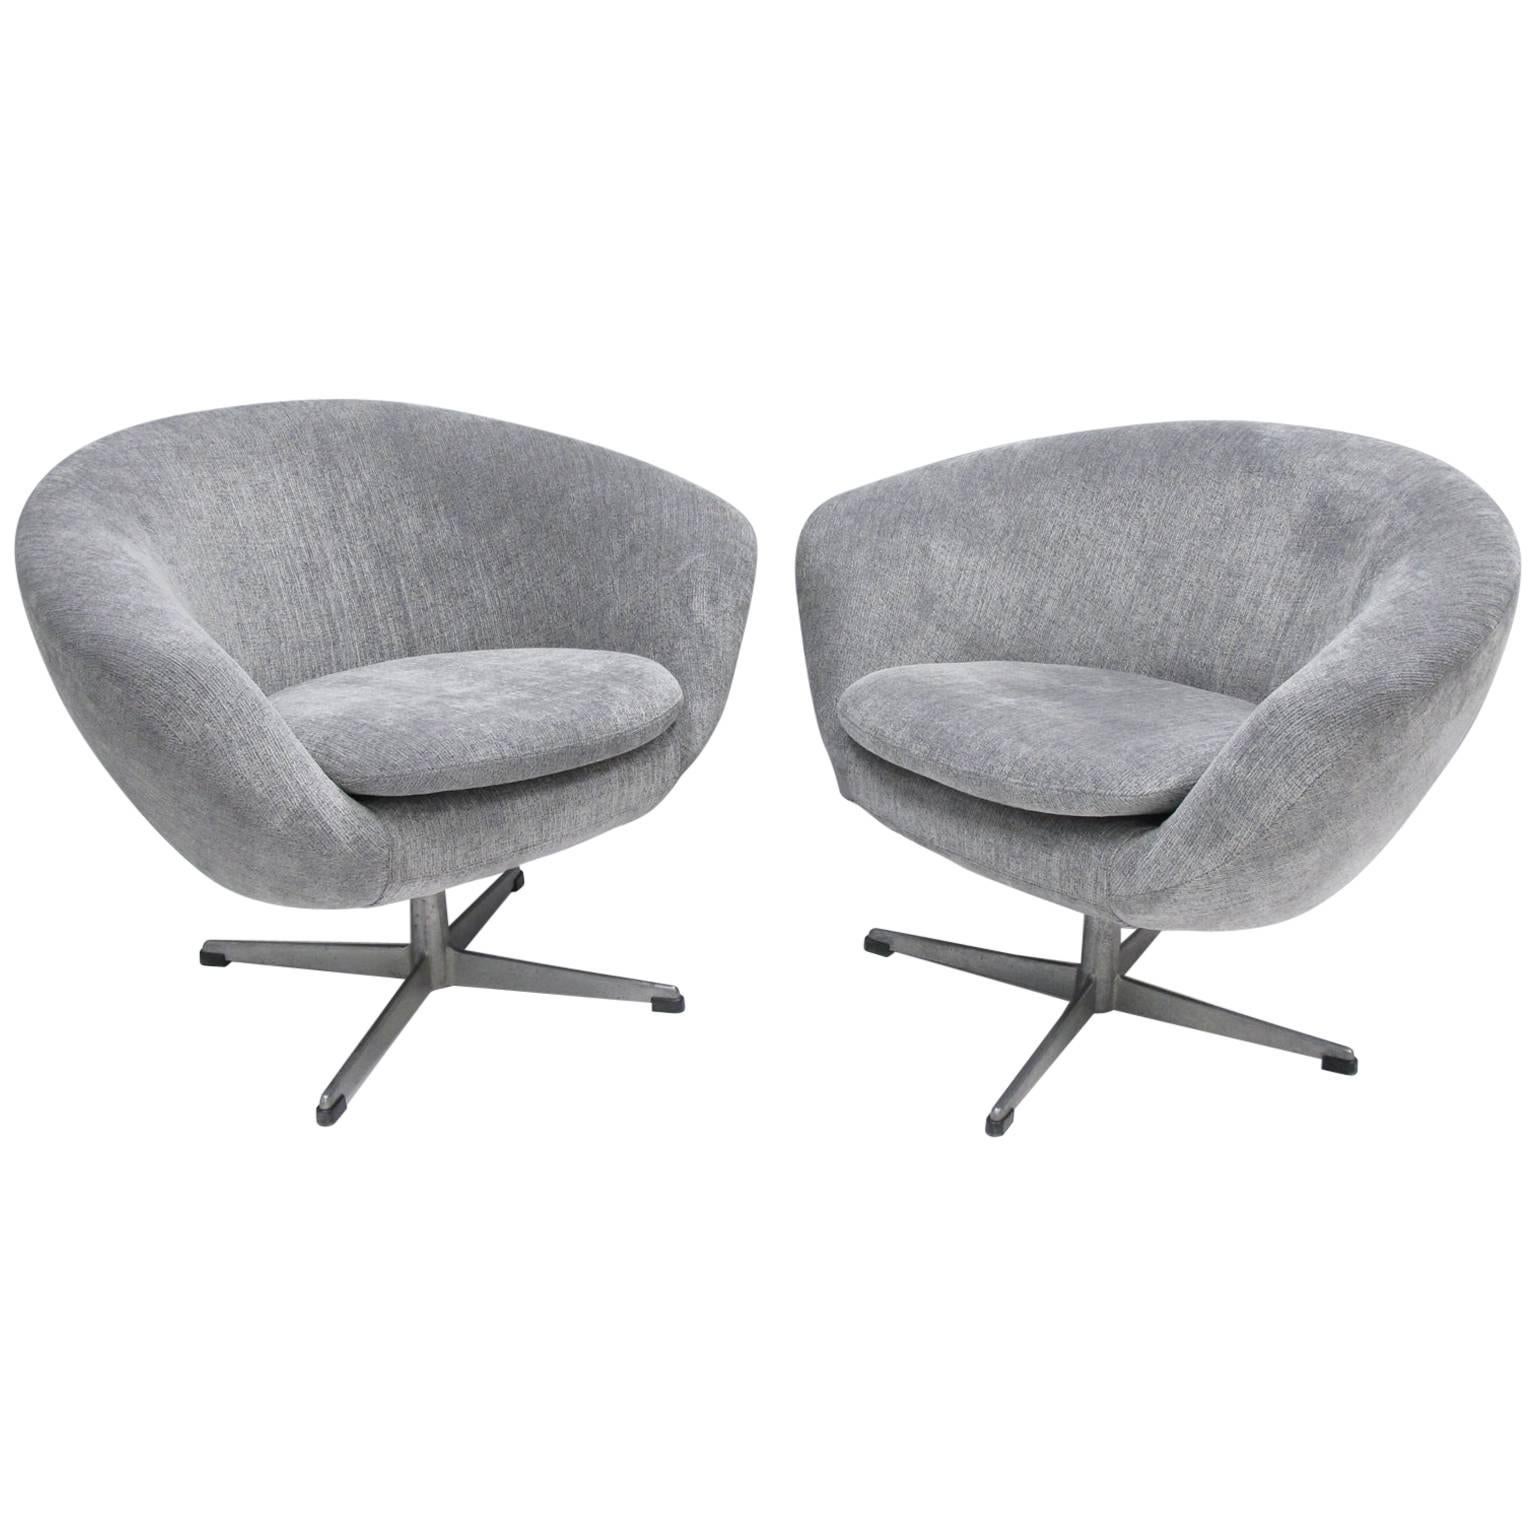 Pair of Mid-Century Modern Overman Sweden Pod Swivel Lounge Chairs Armchairs